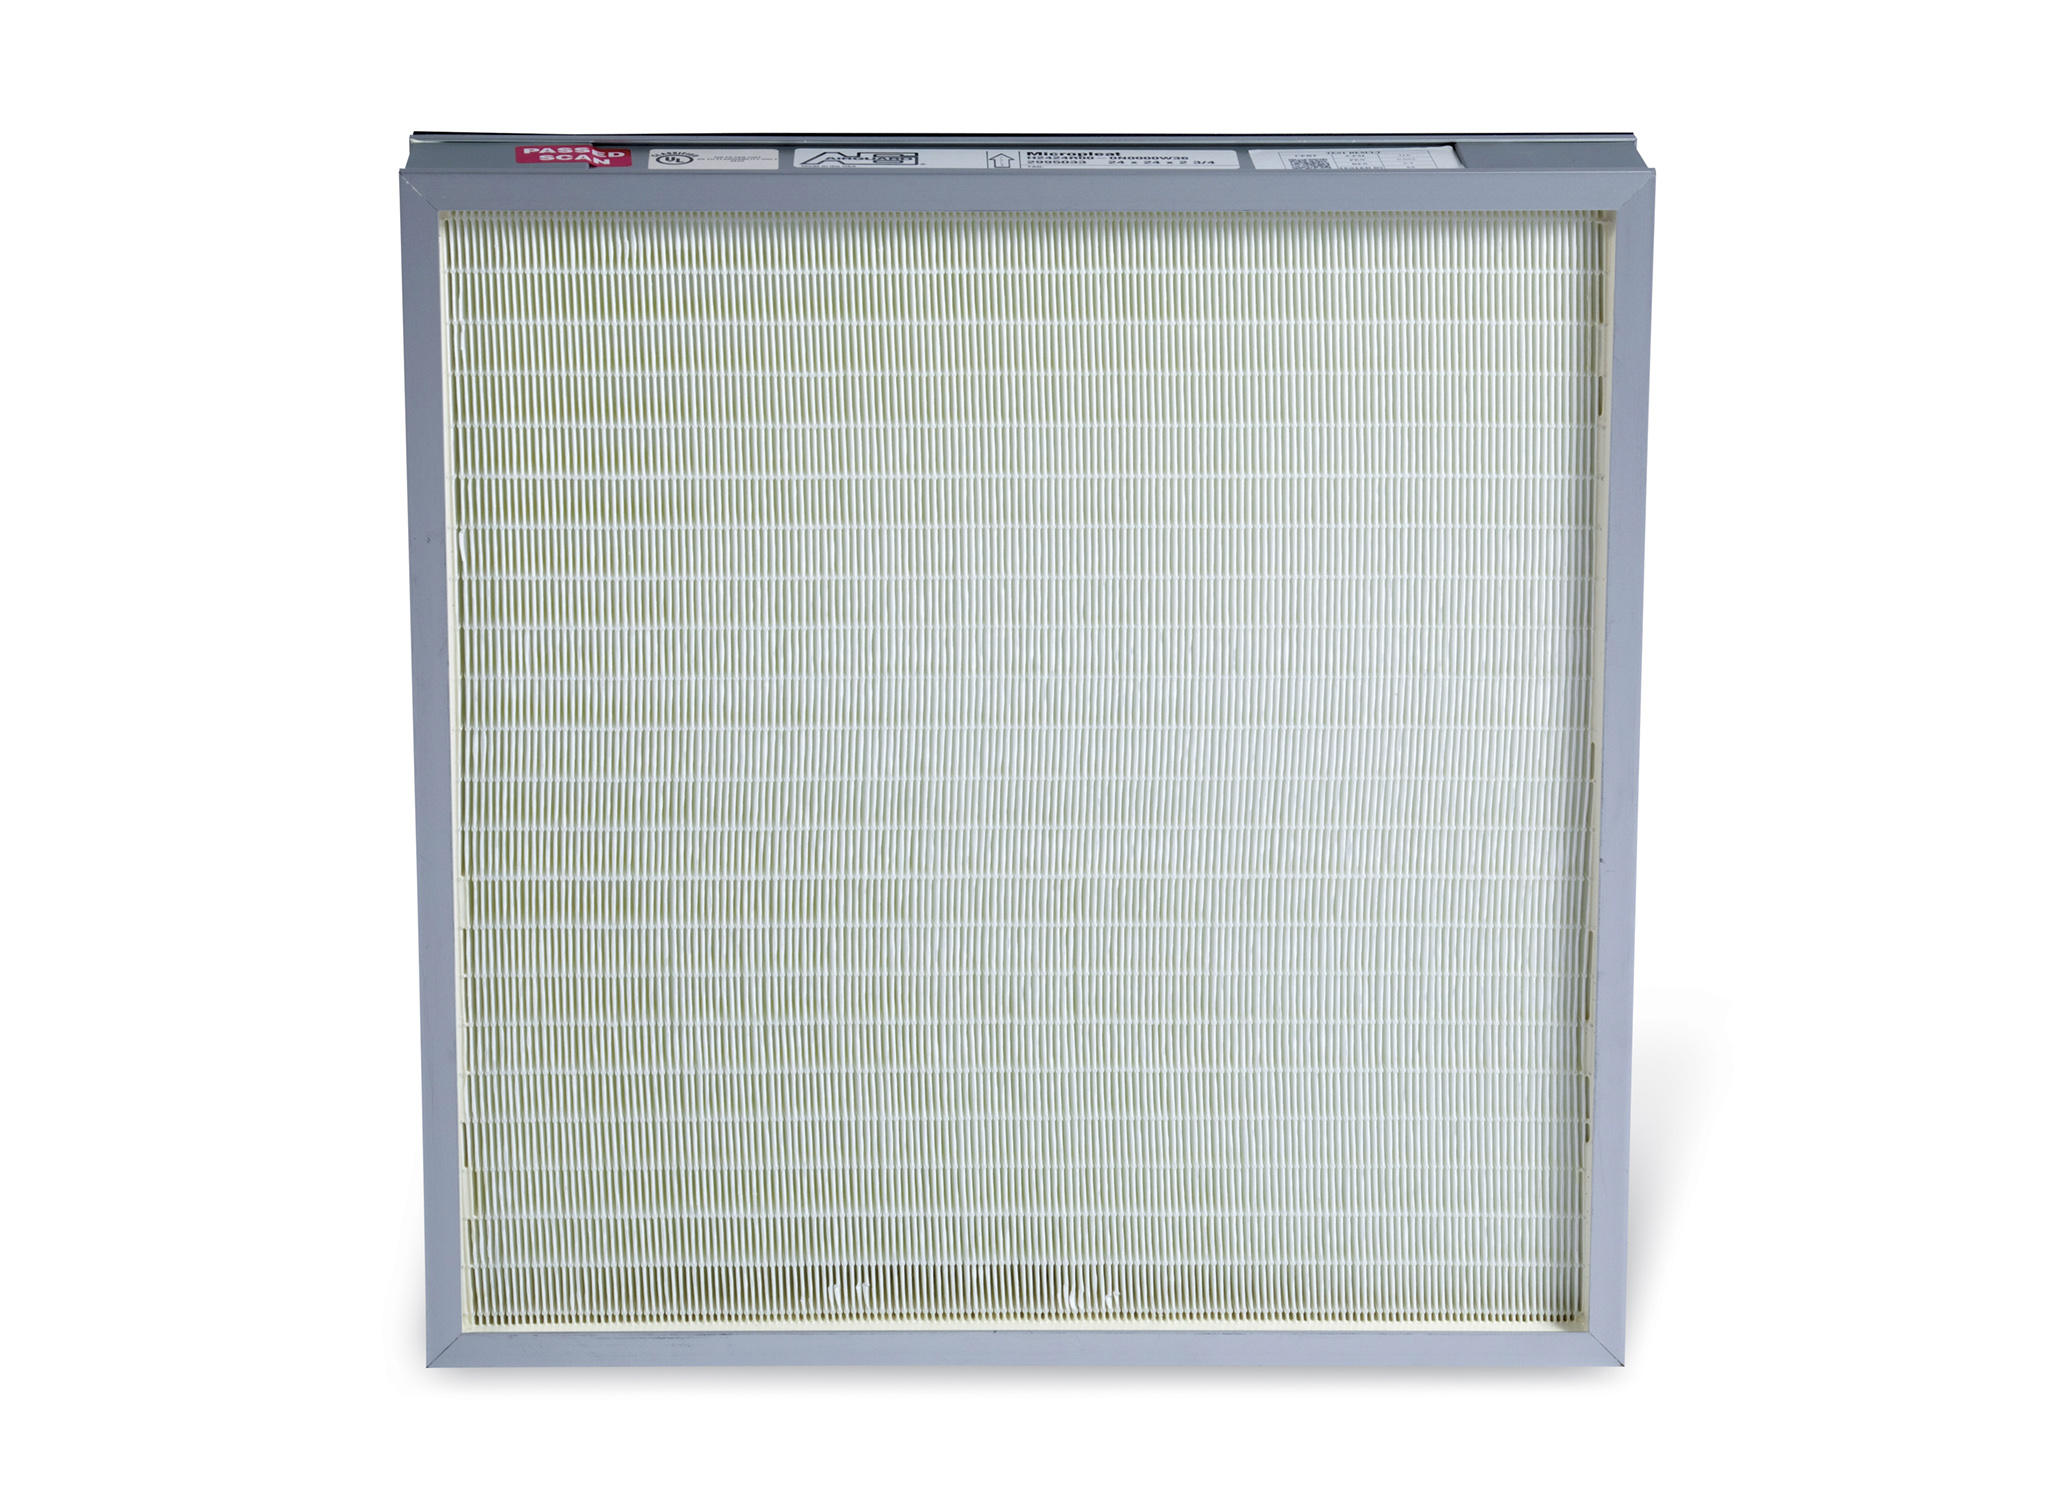 Micropleat high-efficiency filters are designed for HVAC applications.